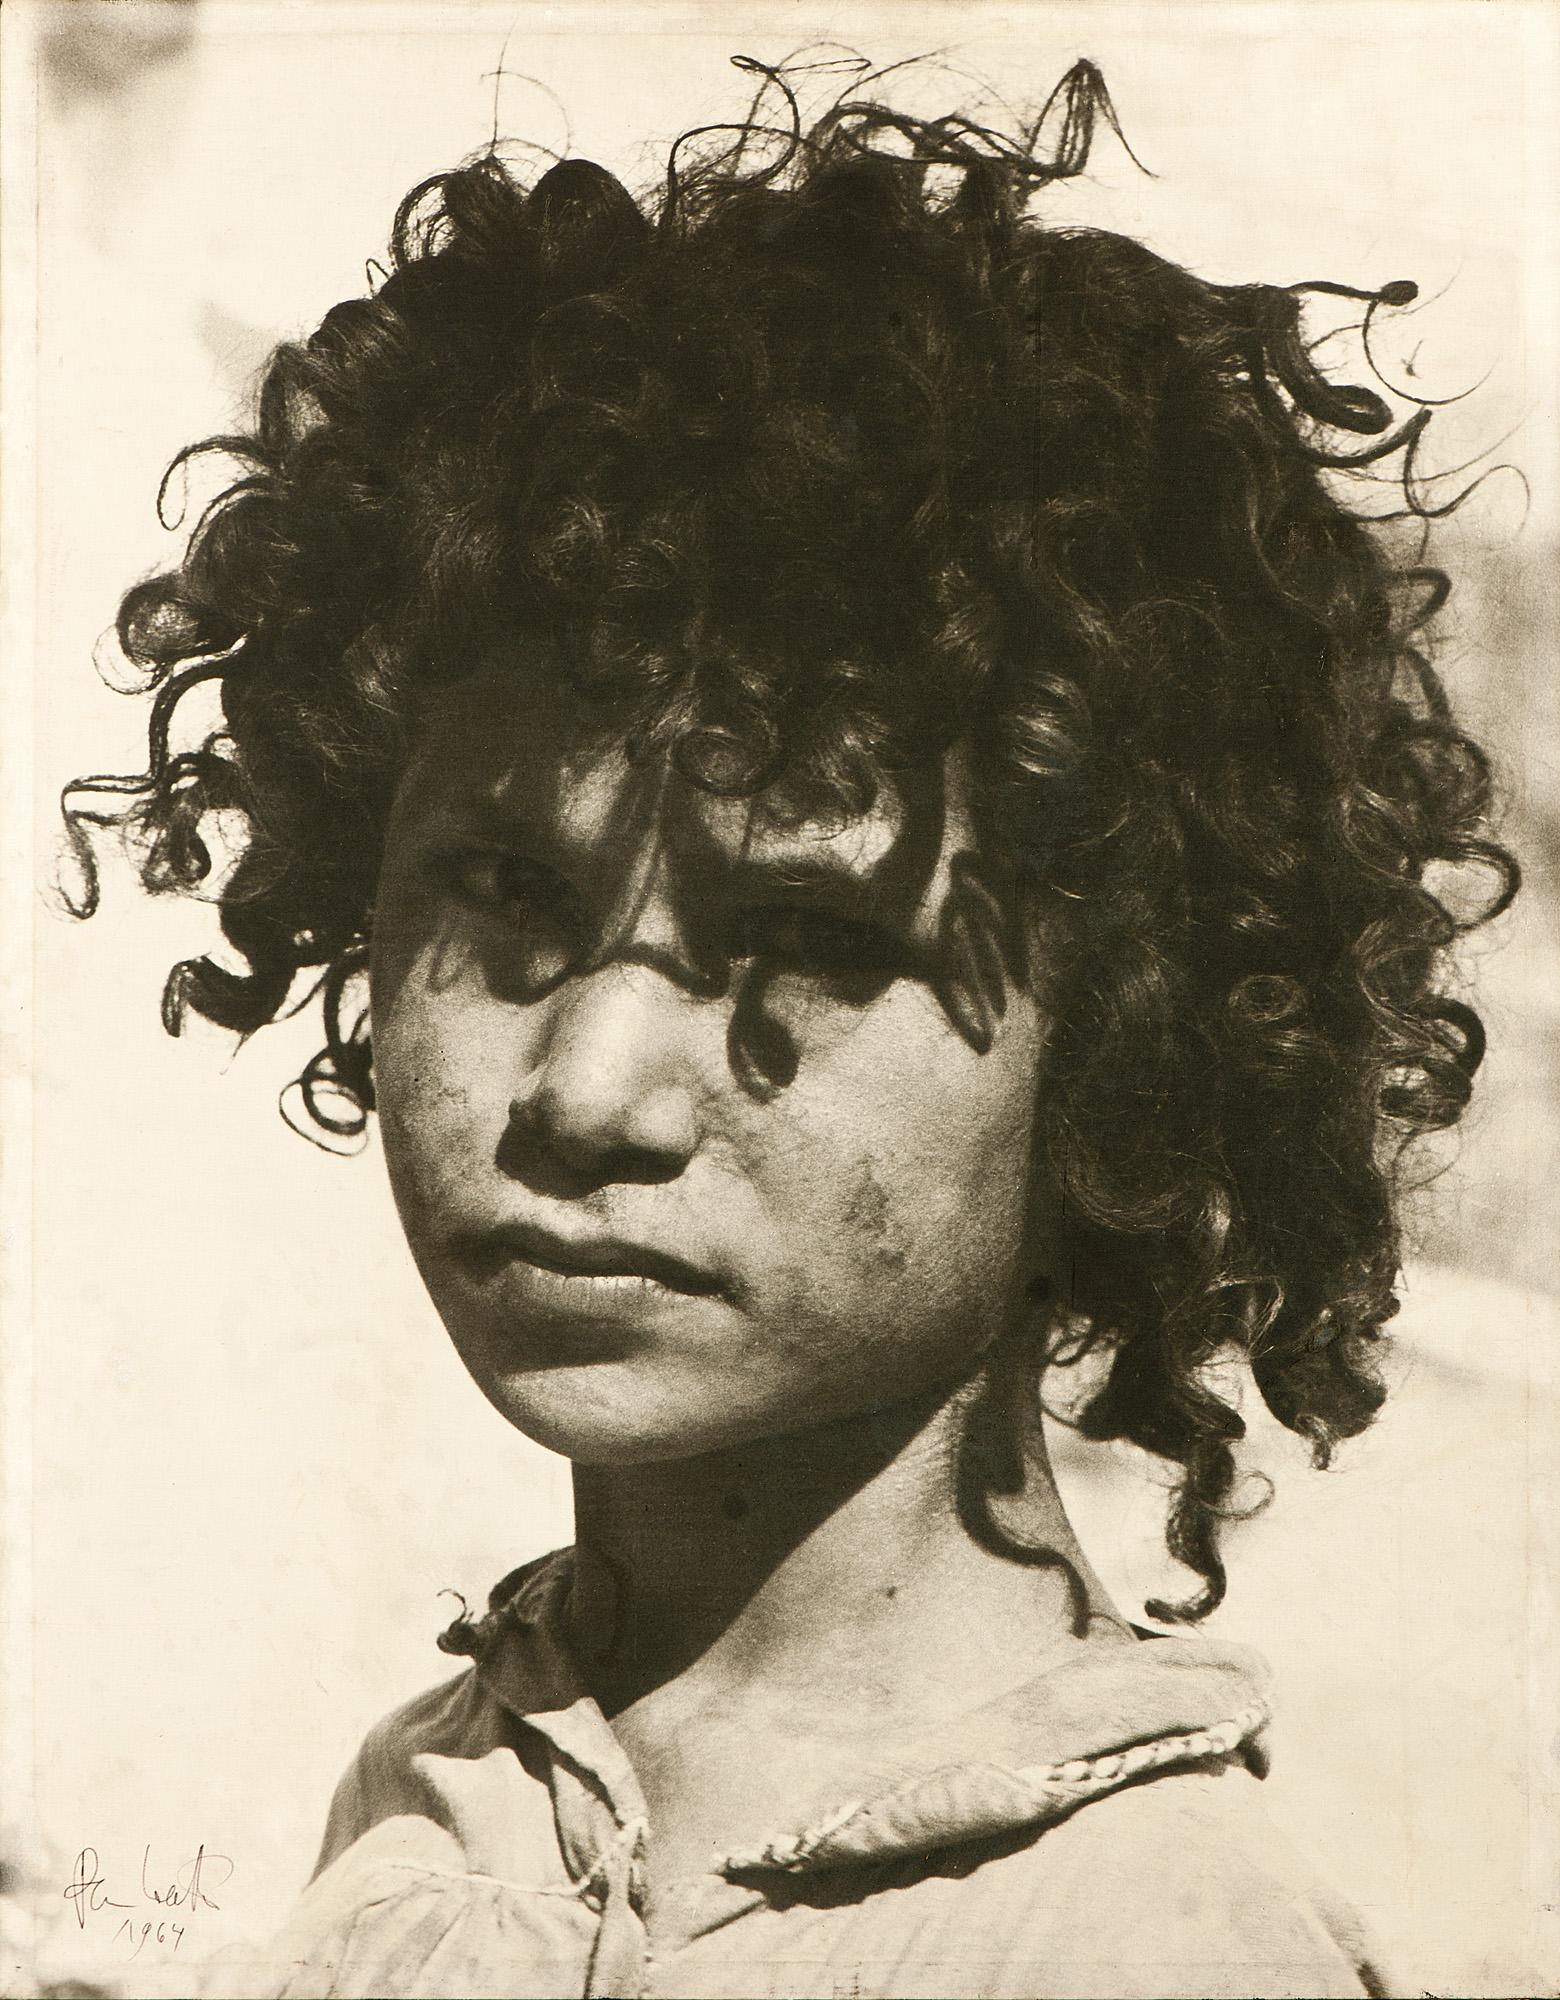 PAN Walther, Large Photo on Canvas, Photo of a Boy, Unique, signed and dated - Modern Photograph by Walther Pan